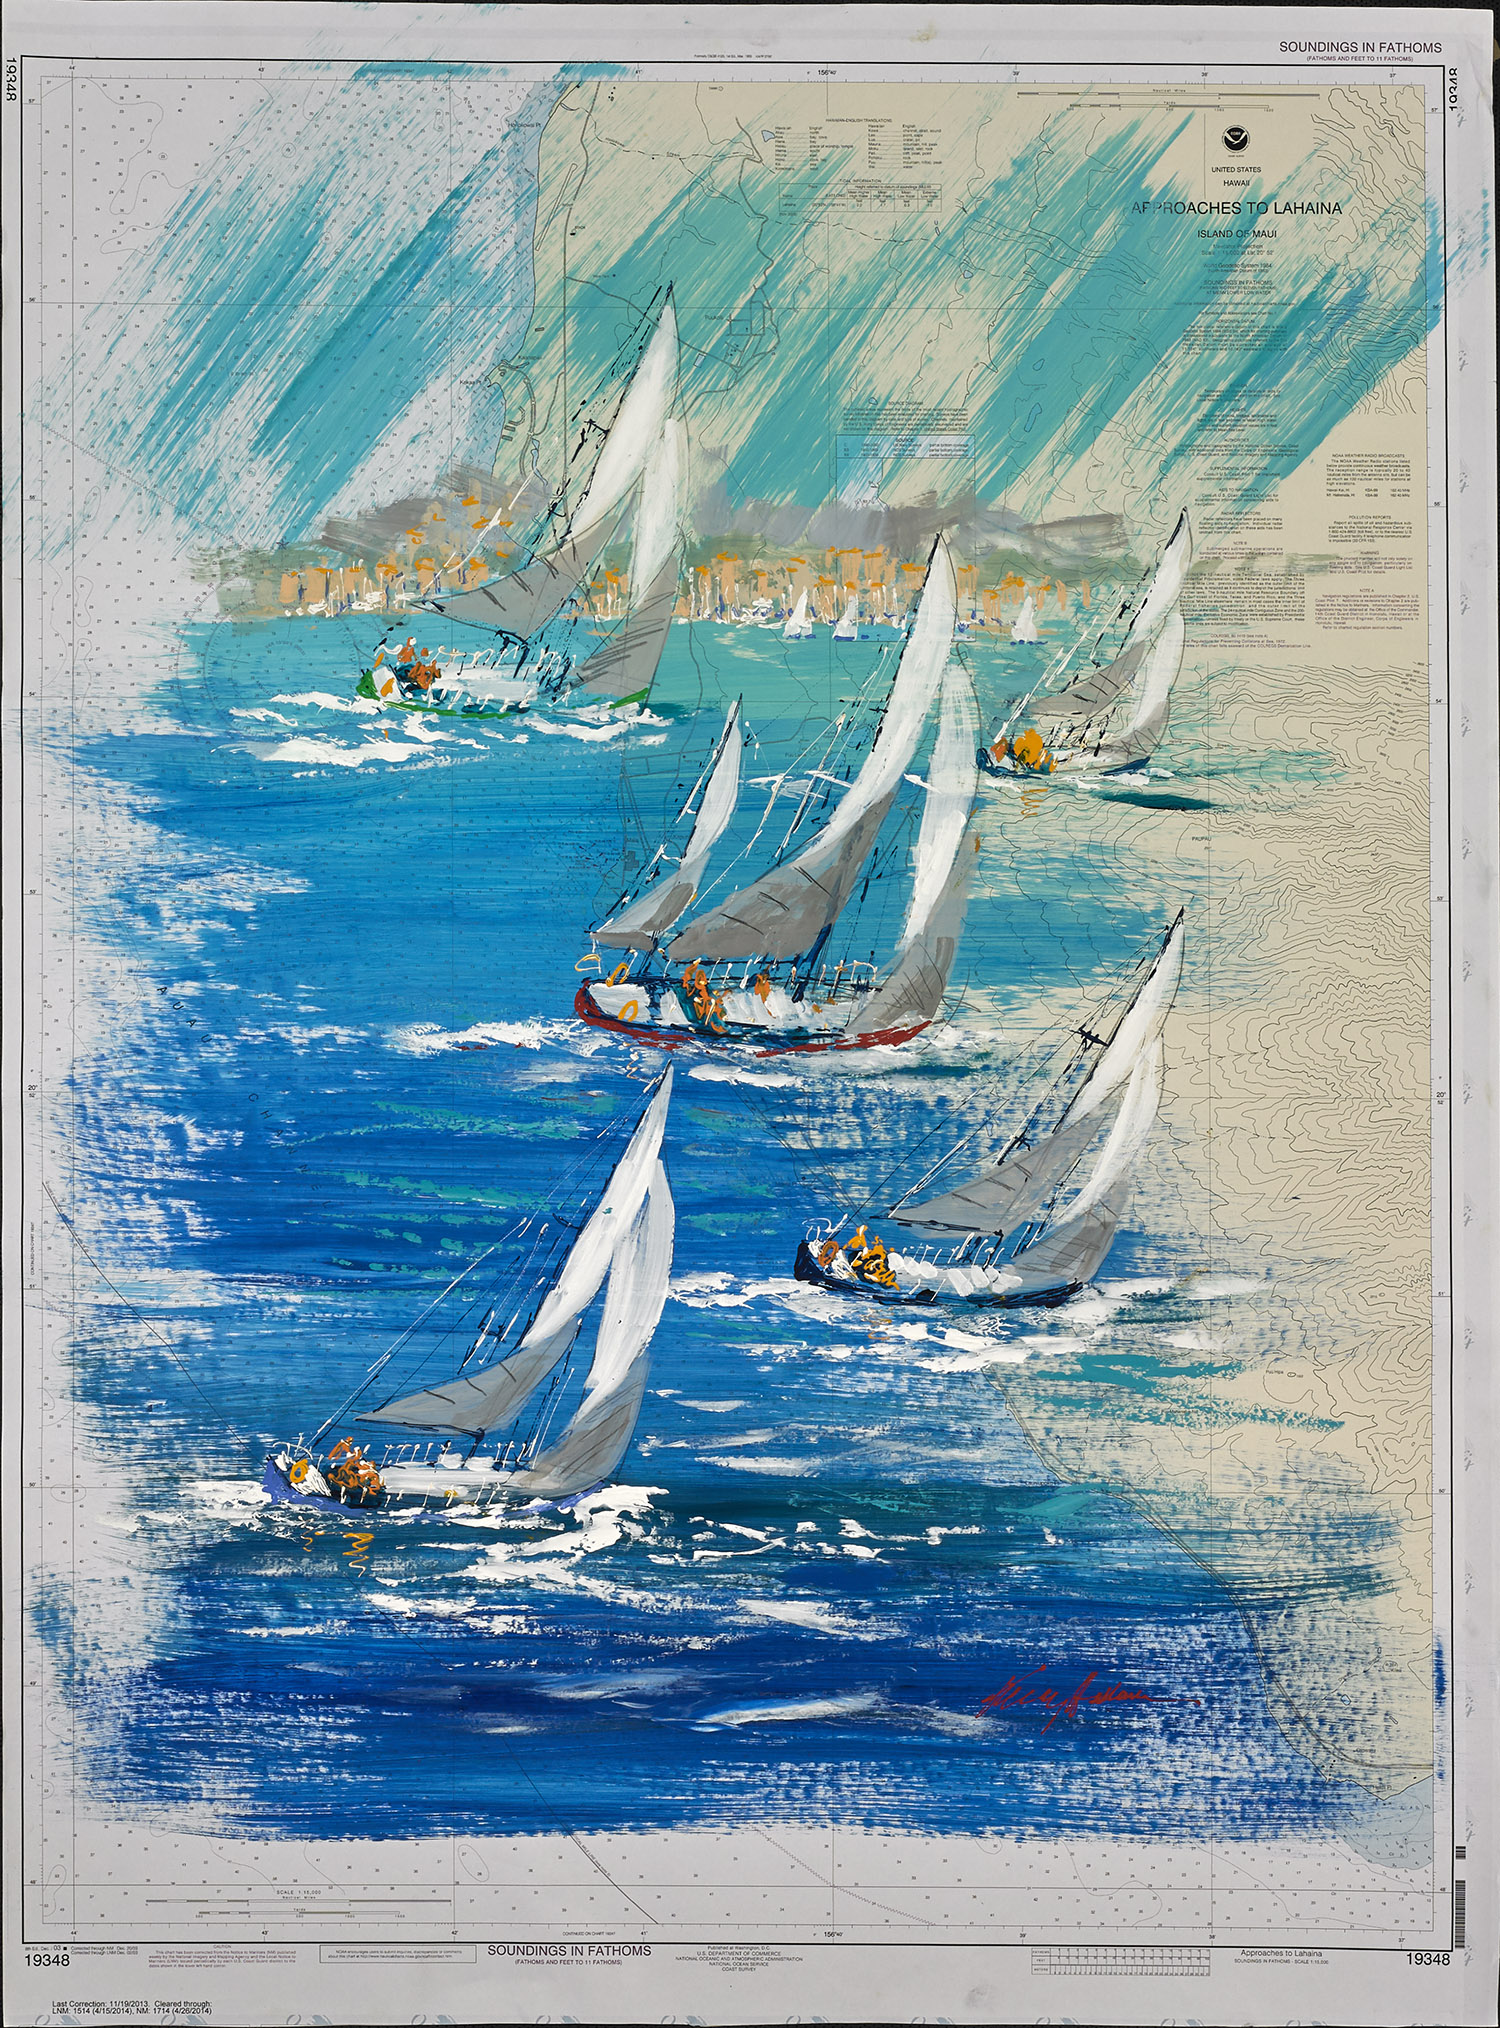 Kerry Hallam, Approaches to Lahaina, acrylic on nautical chart, 45.75 x 34.4 Inches